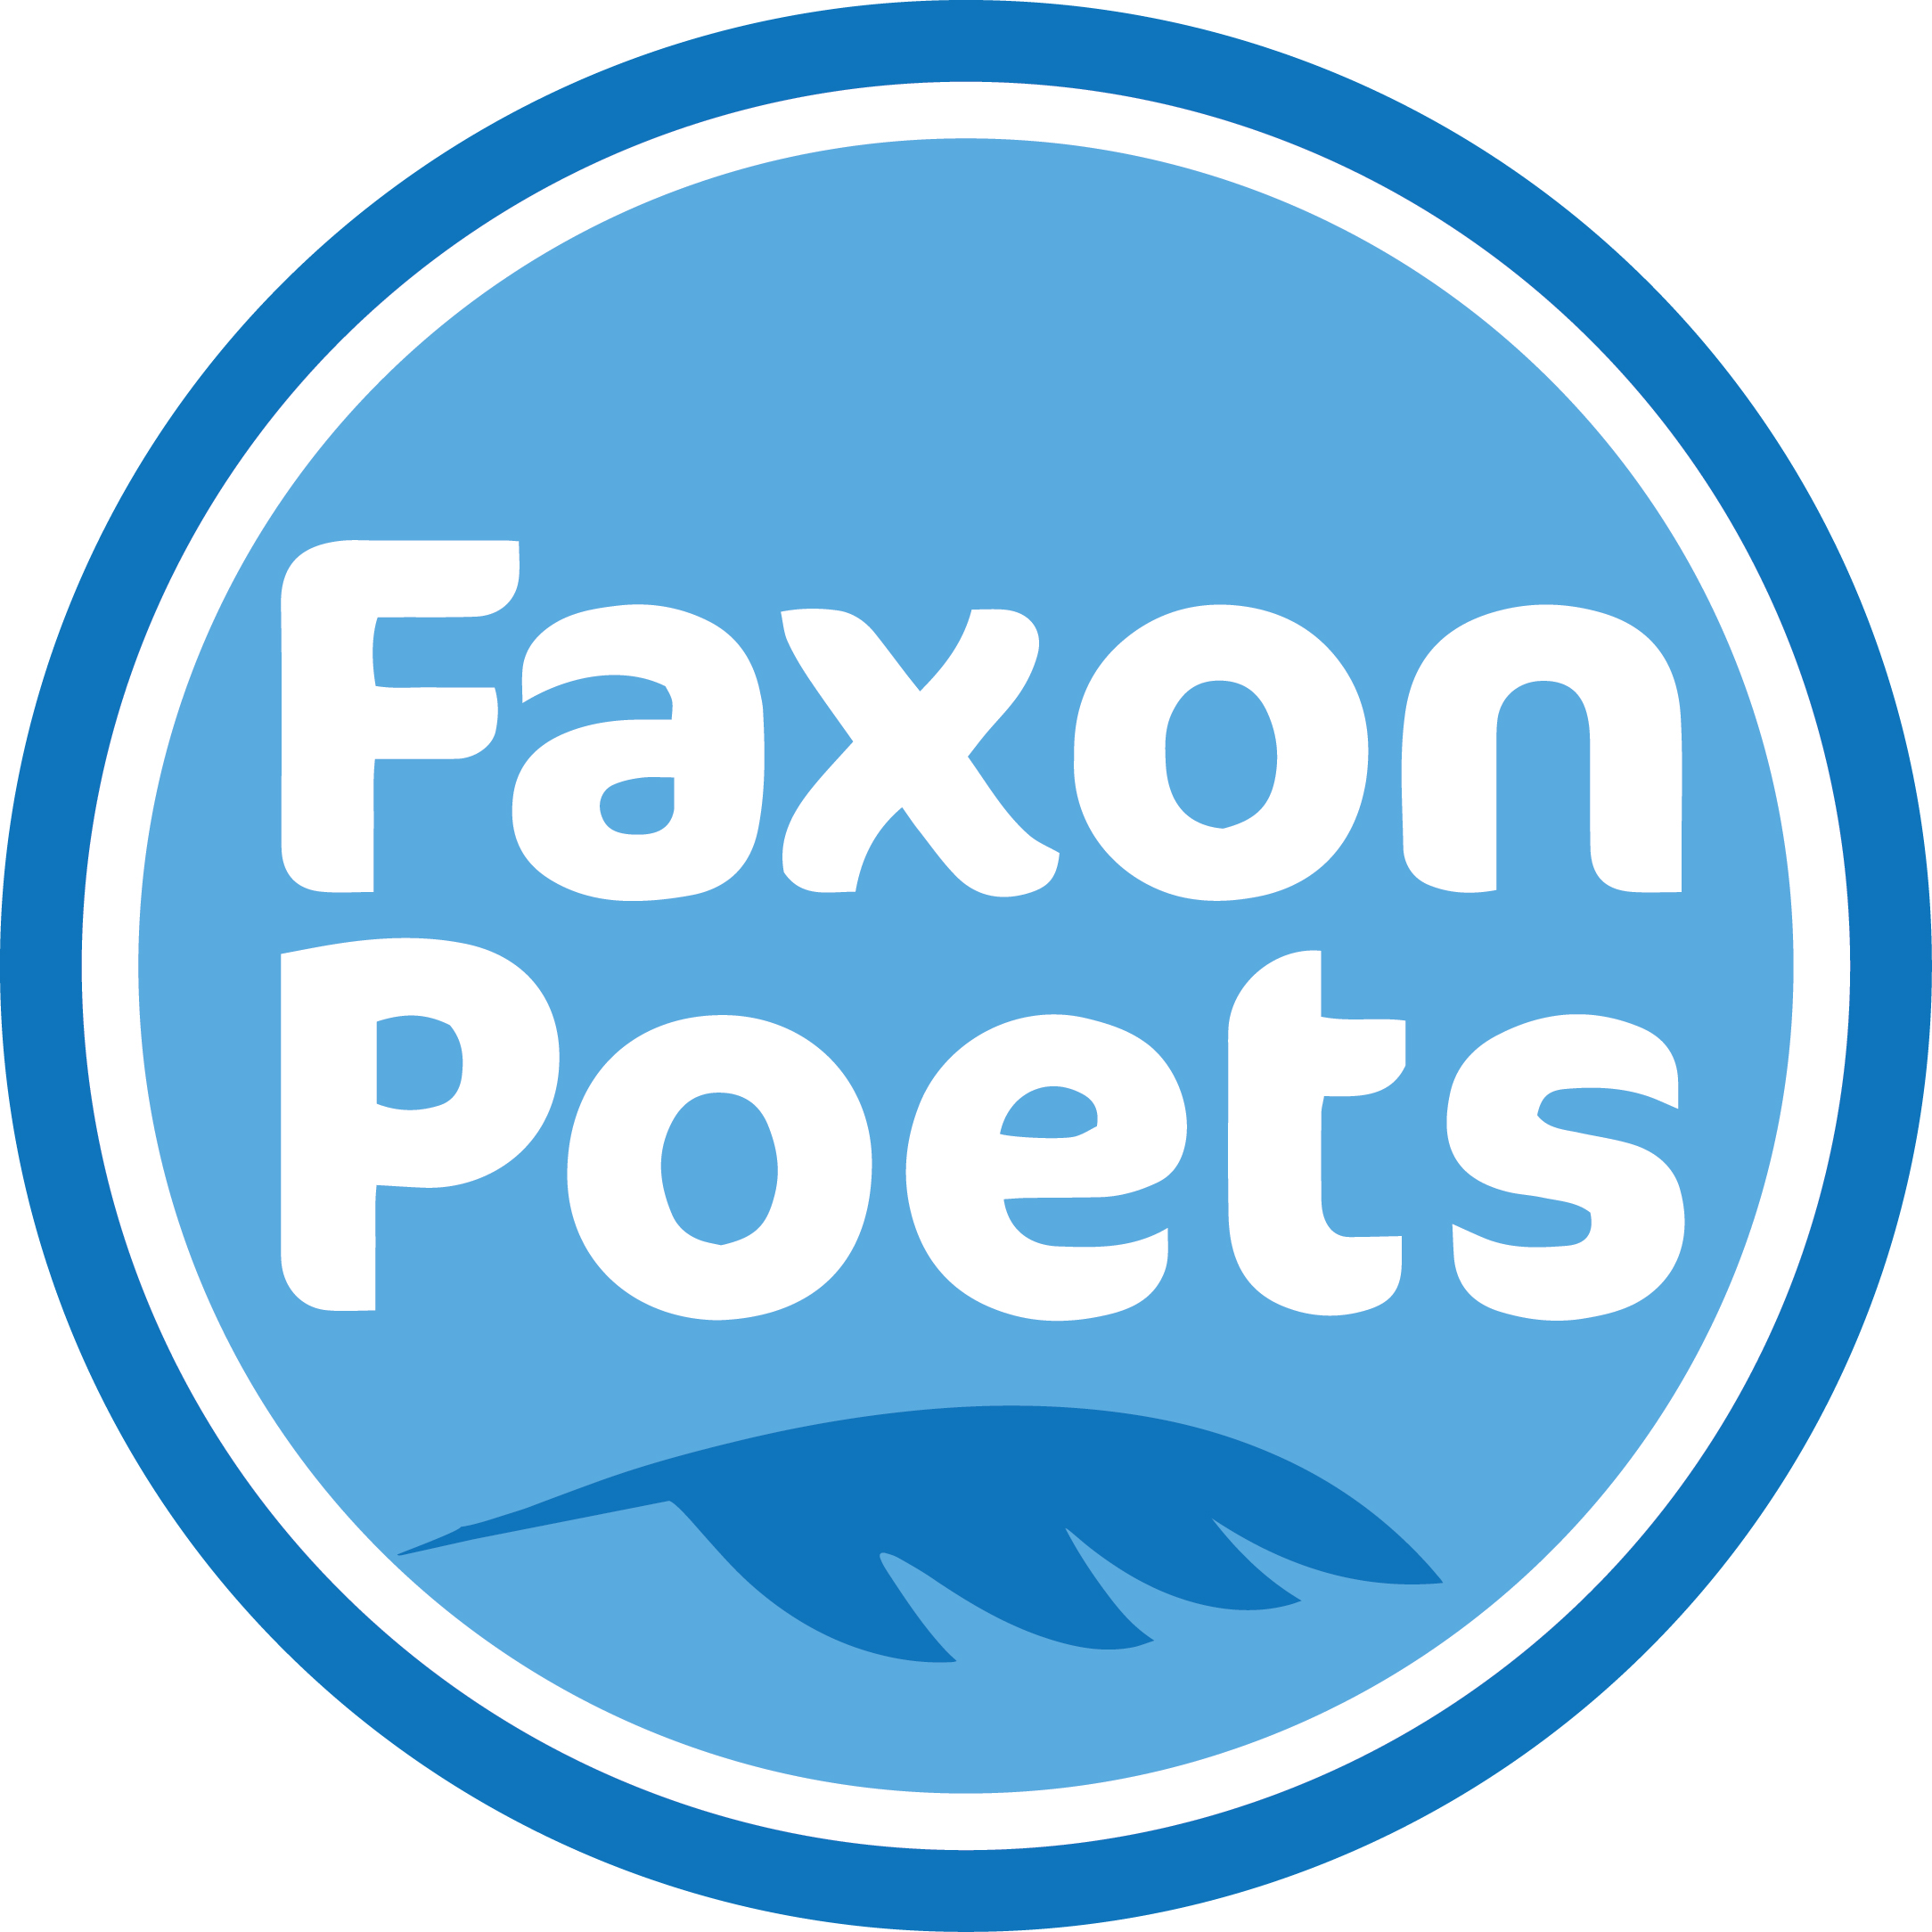 Faxon Poets Meet at the Noah Webster Library